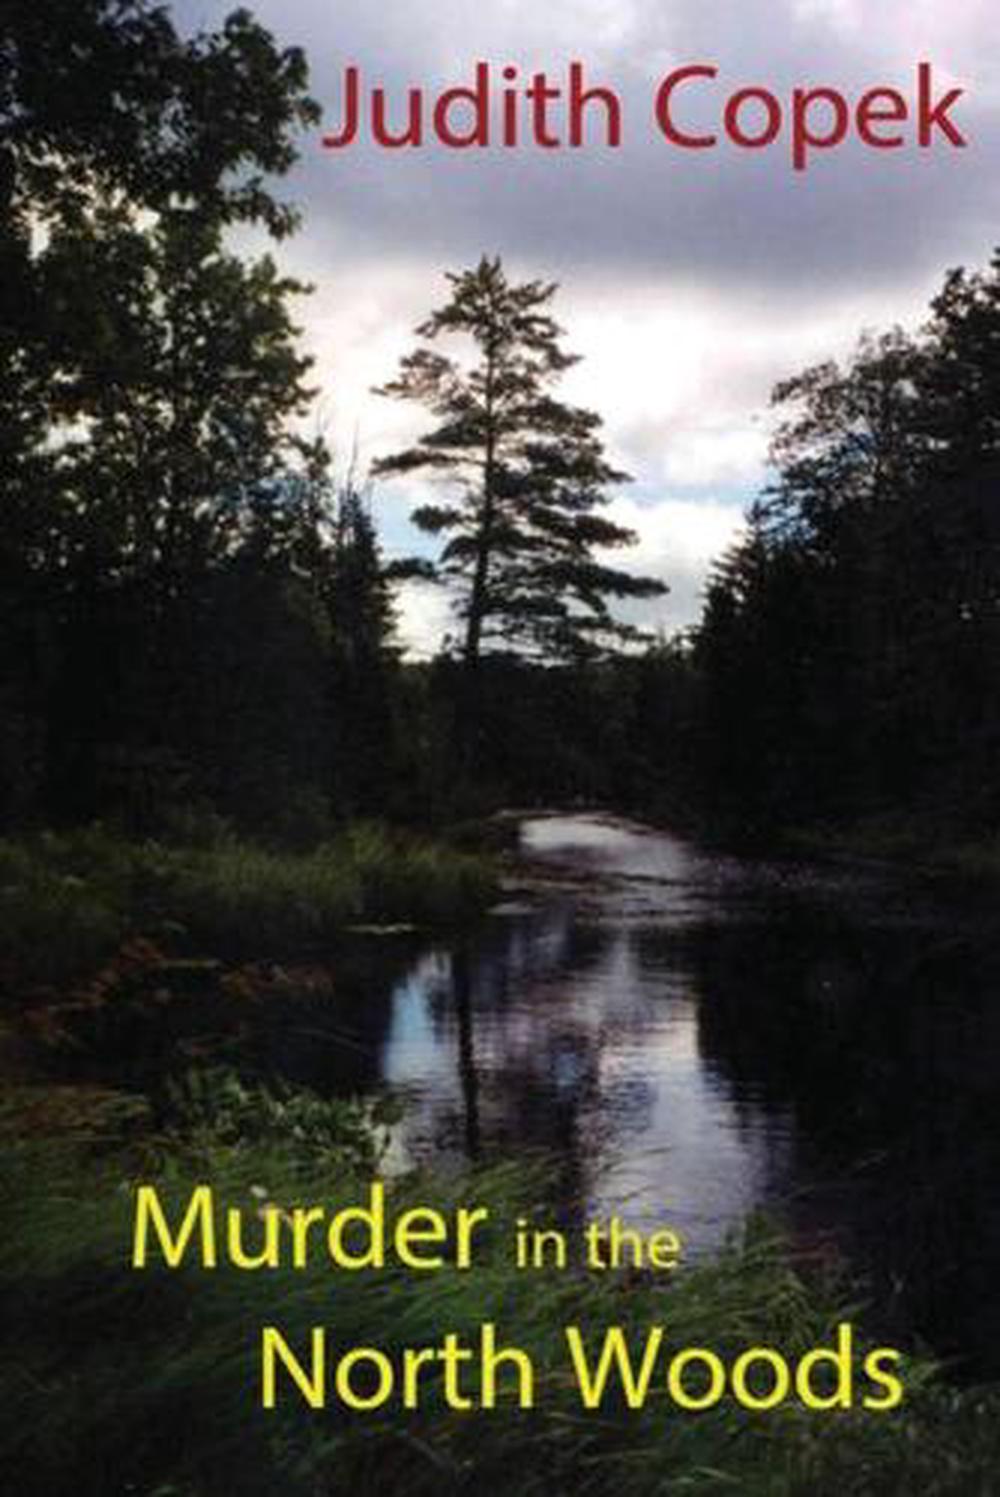 book review of north woods